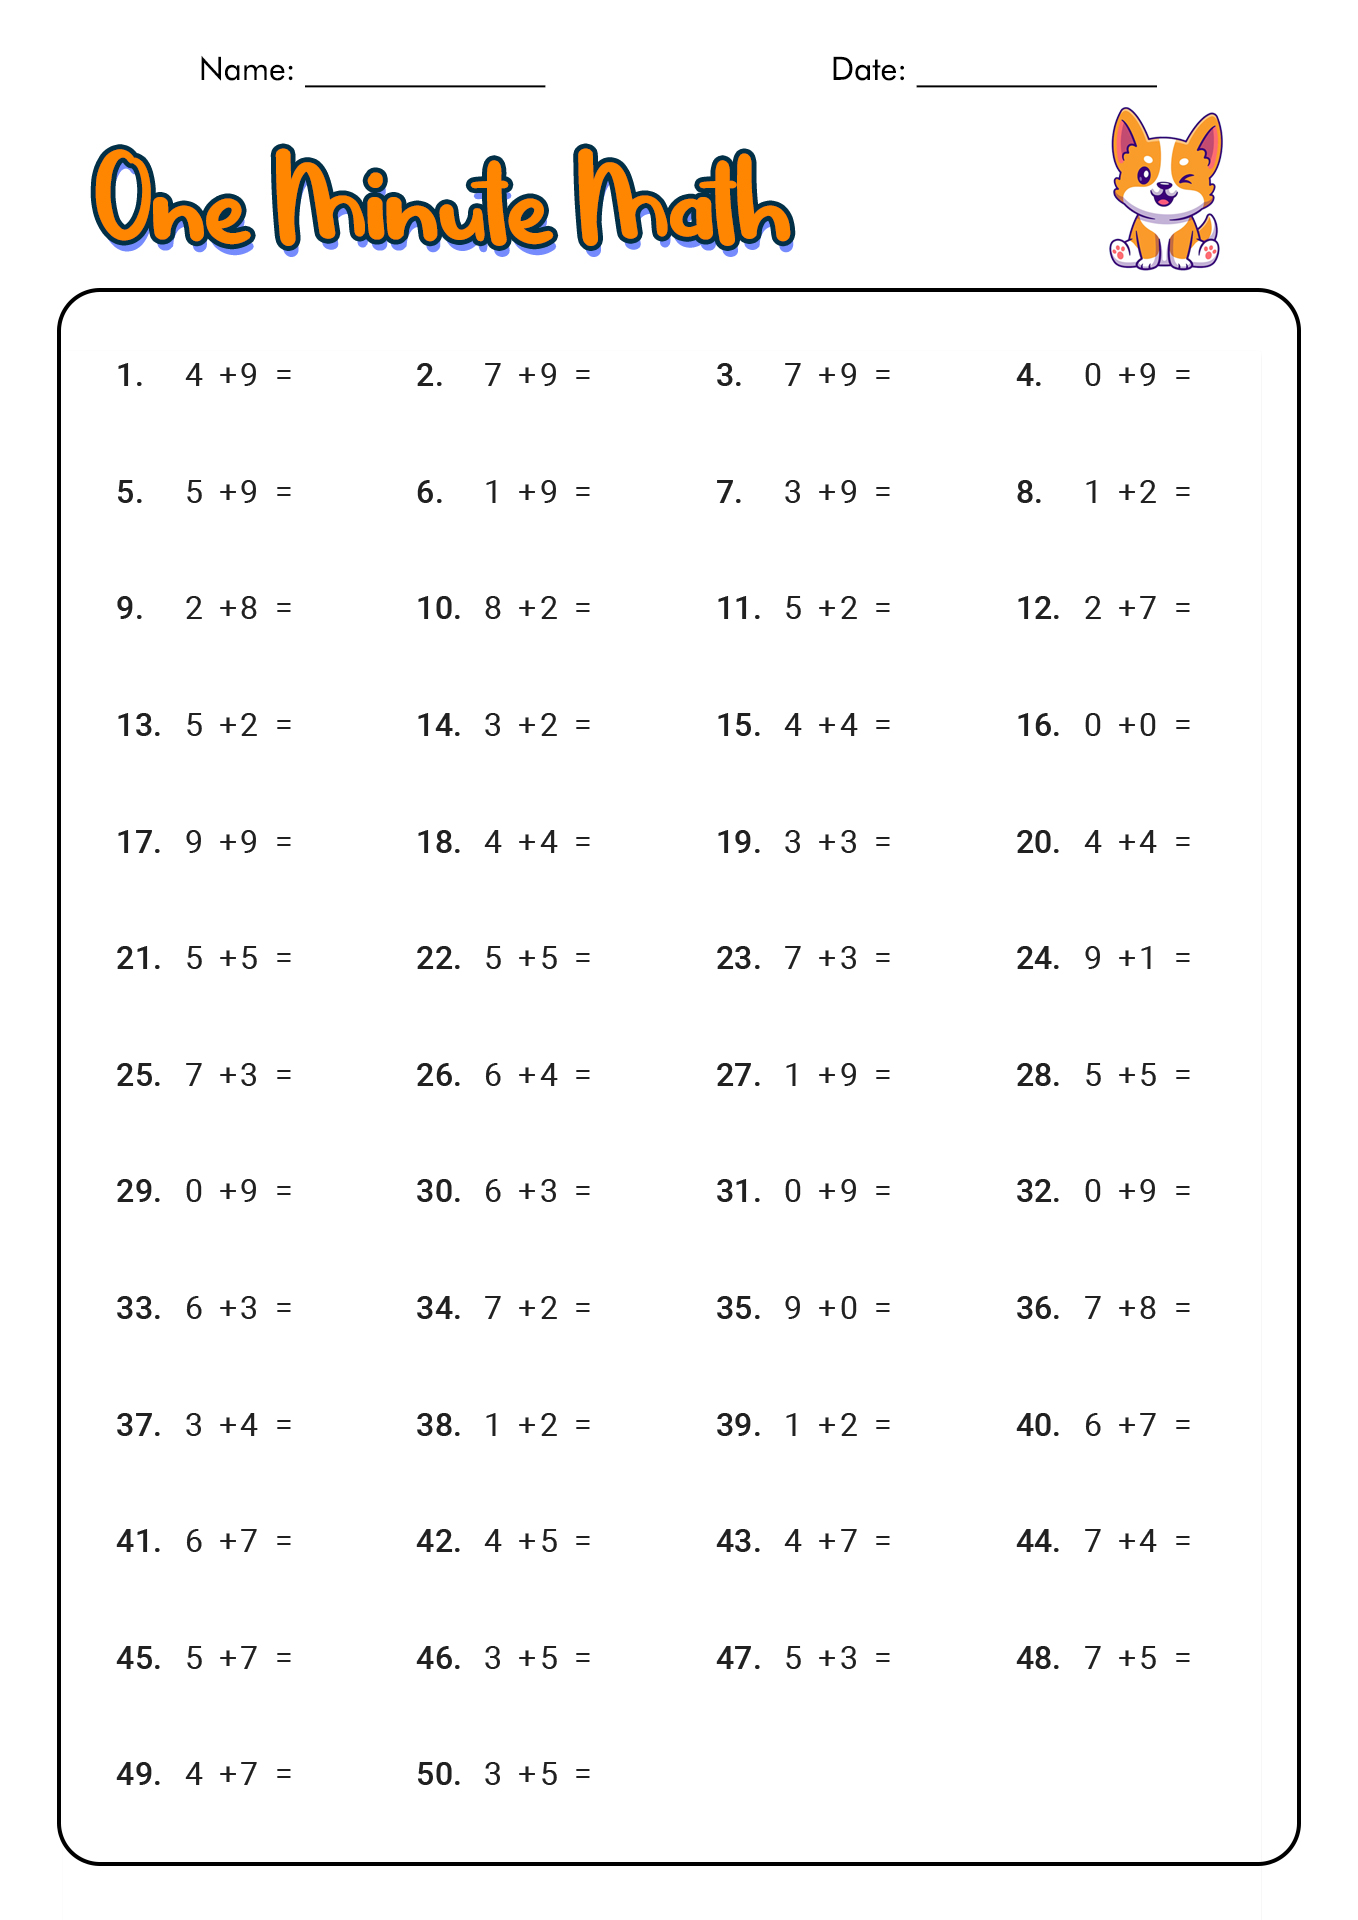 17 Best Images of 1 Minute Timed Addition Worksheets - Math Addition